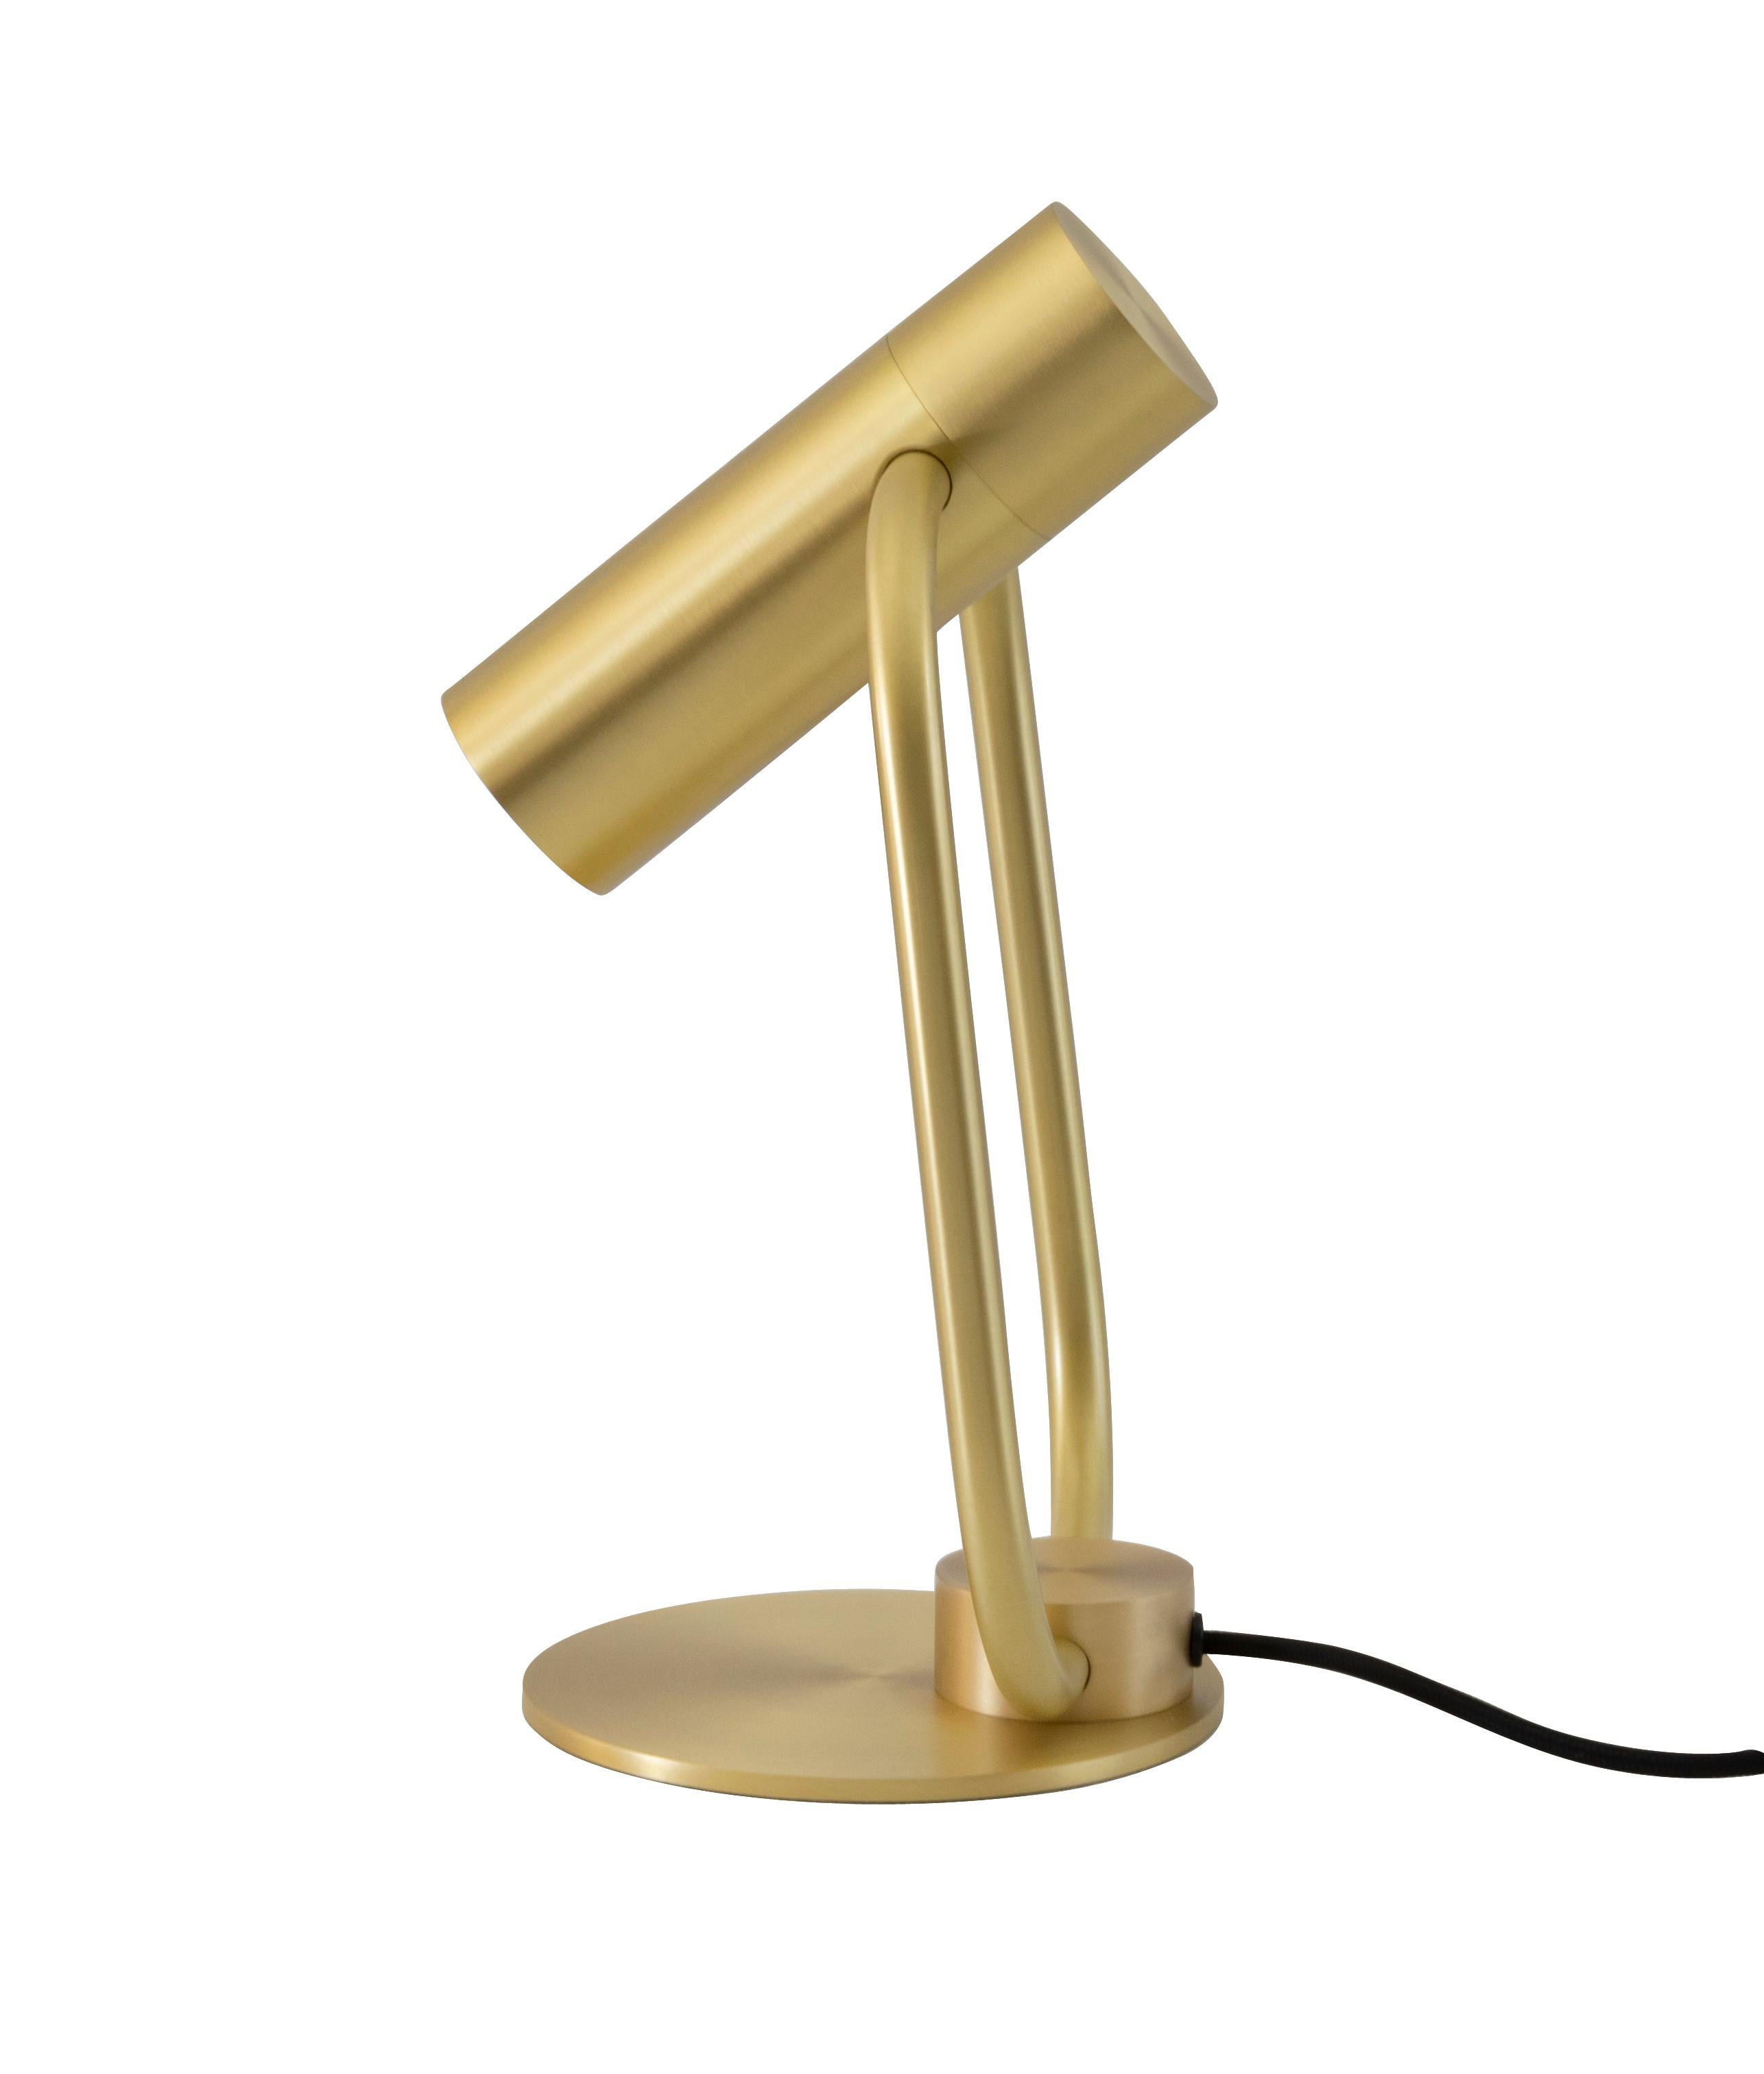 Storm table lamp by Emilie Cathelineau
Dimensions: D 15.6 x W 5 X H 26.5 cm
Materials: solid brass, white polycarbonate.
Others finishes are available.

All our lamps can be wired according to each country. If sold to the USA it will be wired